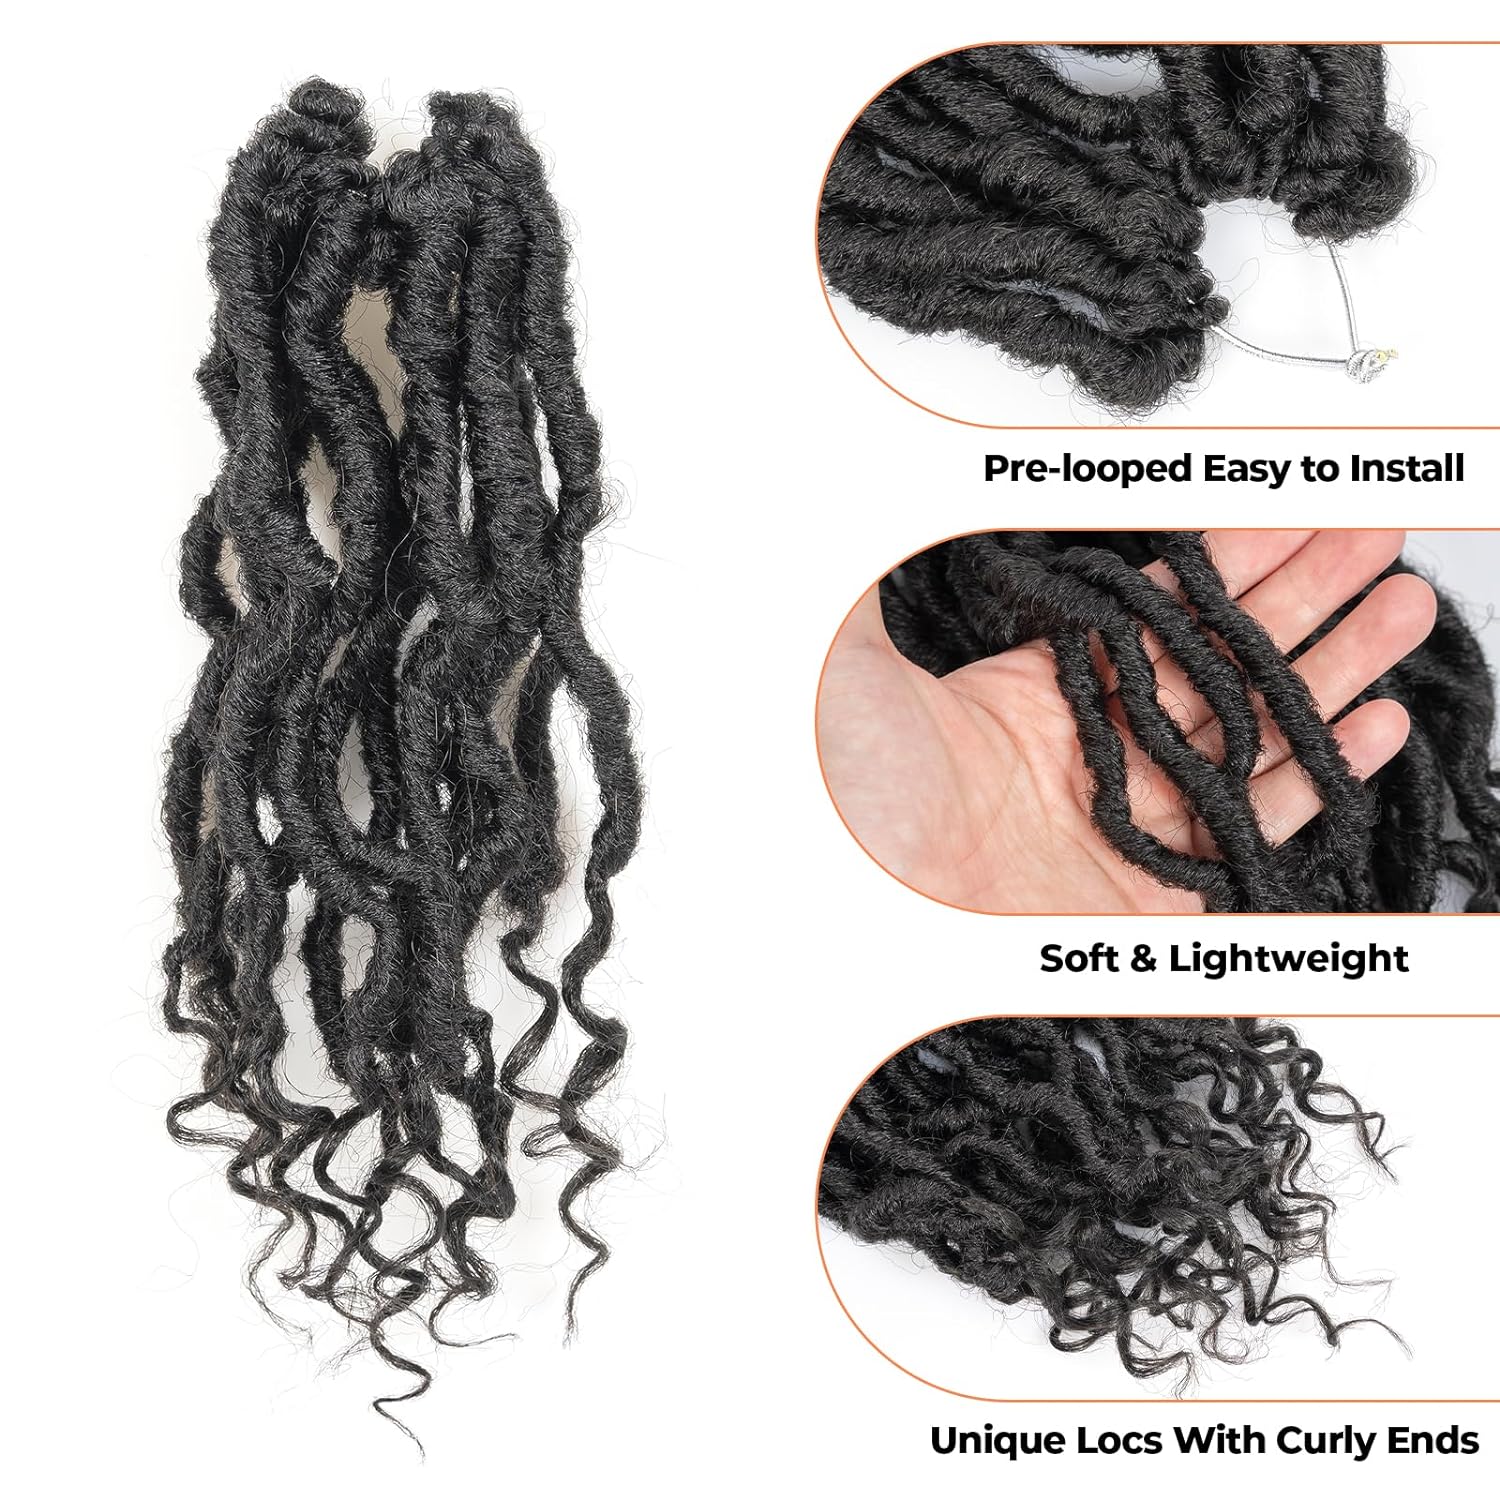 FAST SHIPPING 3-5 DAY PL | Toyotress Passion Faux Locs Crochet Hair - 8 Packs Natural Black Faux Locs Crochet Hair Curly Ends, Short Bob Curly Locs Braids Pre-Looped Synthetic Braiding Hair Extensions